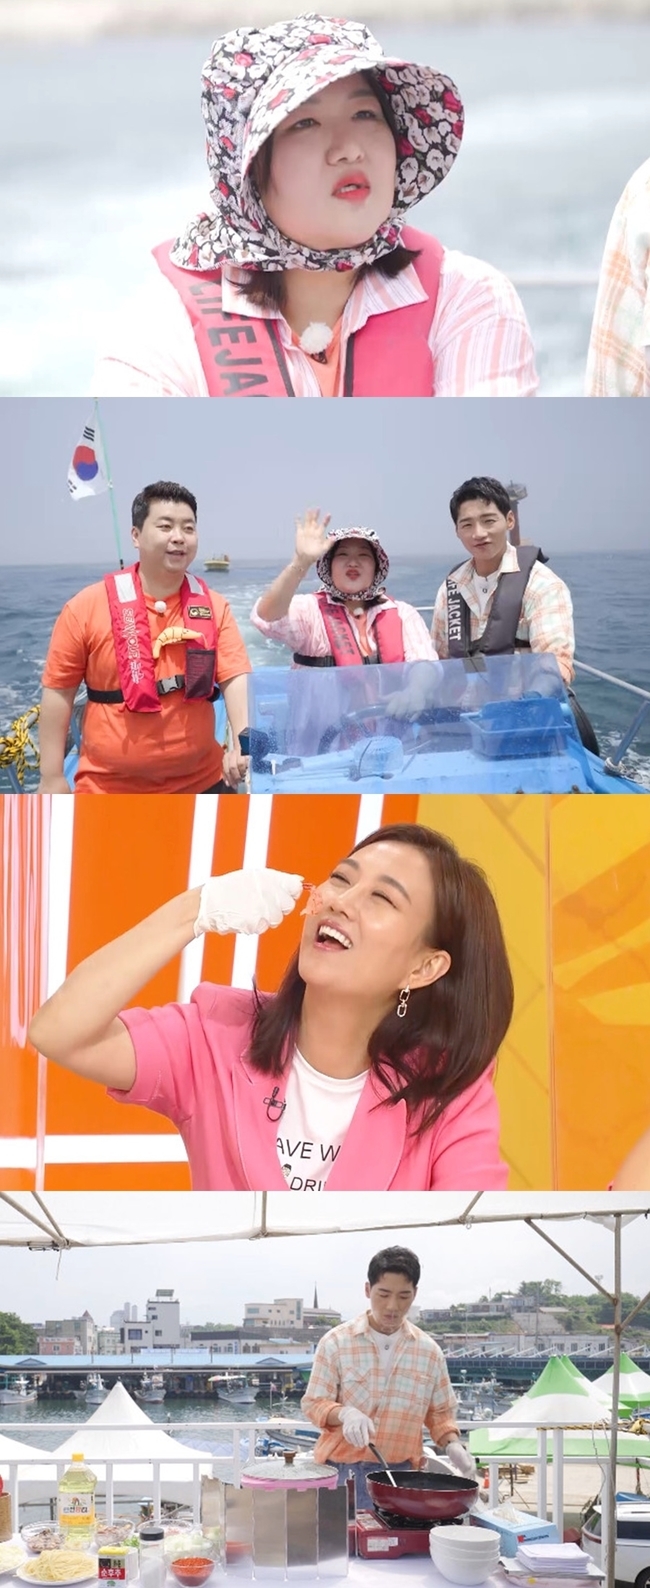 Actor Ha Jae-sook shows off her crush charm with her boat driving skills.Singer Park Gun and actor Ha Jae-sook will visit Pingyao in Gangwon Province to sell Trachysalambria curvirostris at KBS 2TV entertainment program Online Market (directed by Son Ja-yeon), which will be broadcast on July 21, and will satisfy both viewers eyes and mouths.Pingyao Ha Jae-sook will show Sook Tour where you can feel Pingyao properly for Park Gun and Jeong Ho-young.Ha Jae-sook manipulates the steering wheel with a good hand, and Park Gun is impressed that the ride is not a joke.Here, Ha Jae-sook introduces the tilted lighthouse, coastal road, and Gangwon World Forest Expo in the waves, and it shows off the aspect of Pingyao military ambassador.The Trachysalambria curvirostris mukbang of Park Gun, Ha Jae-sook and Jeong Ho-young creates a panel sigh.Pingyao Trachysalambria curvirostris appears in front of the distressed panels, and Jang Yoon-jung is curious about the food that makes everyone happy because he tastes Trachysalambria curvirostris and laughs.In the meantime, Park Gun boasts of his cooking skills learned over his shoulder during the Chinese restaurant Alba.Park Gun calls the president of the Chinese restaurant, which has been Alba for six years, and receives the secrets and completes the Trachysalambria curvirostris chanpon, and Jeong Ho-young, who has been drinking chanpon soup, praises it as I think it can be a restaurant.Delicious food and Pingyao sea view are stealing viewers attention, and expectations for this broadcast are rising.